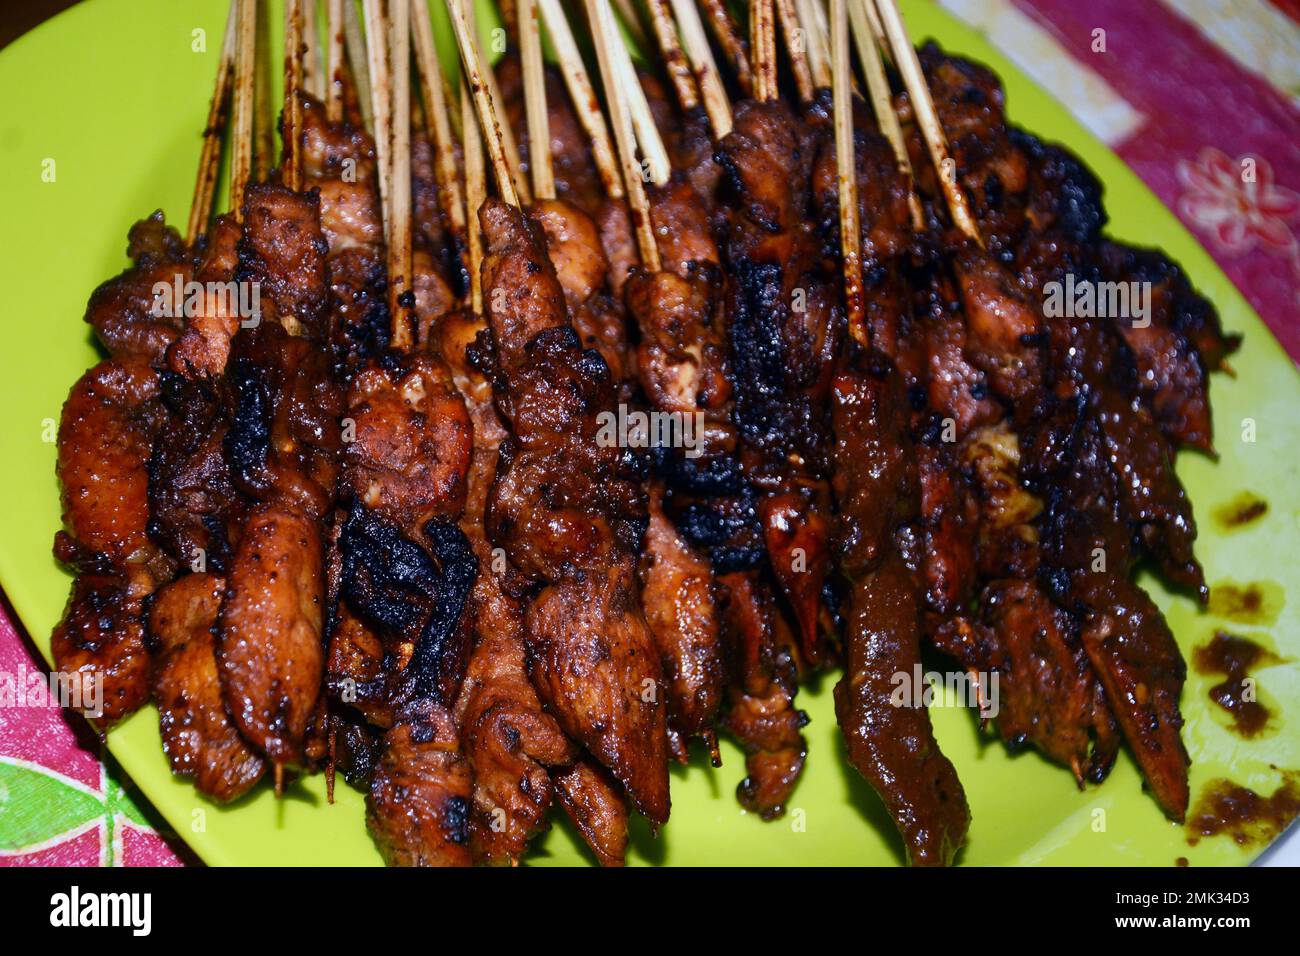 Close up photo of chicken satay, a dish of grilled meat and served with peanut sauce Stock Photo